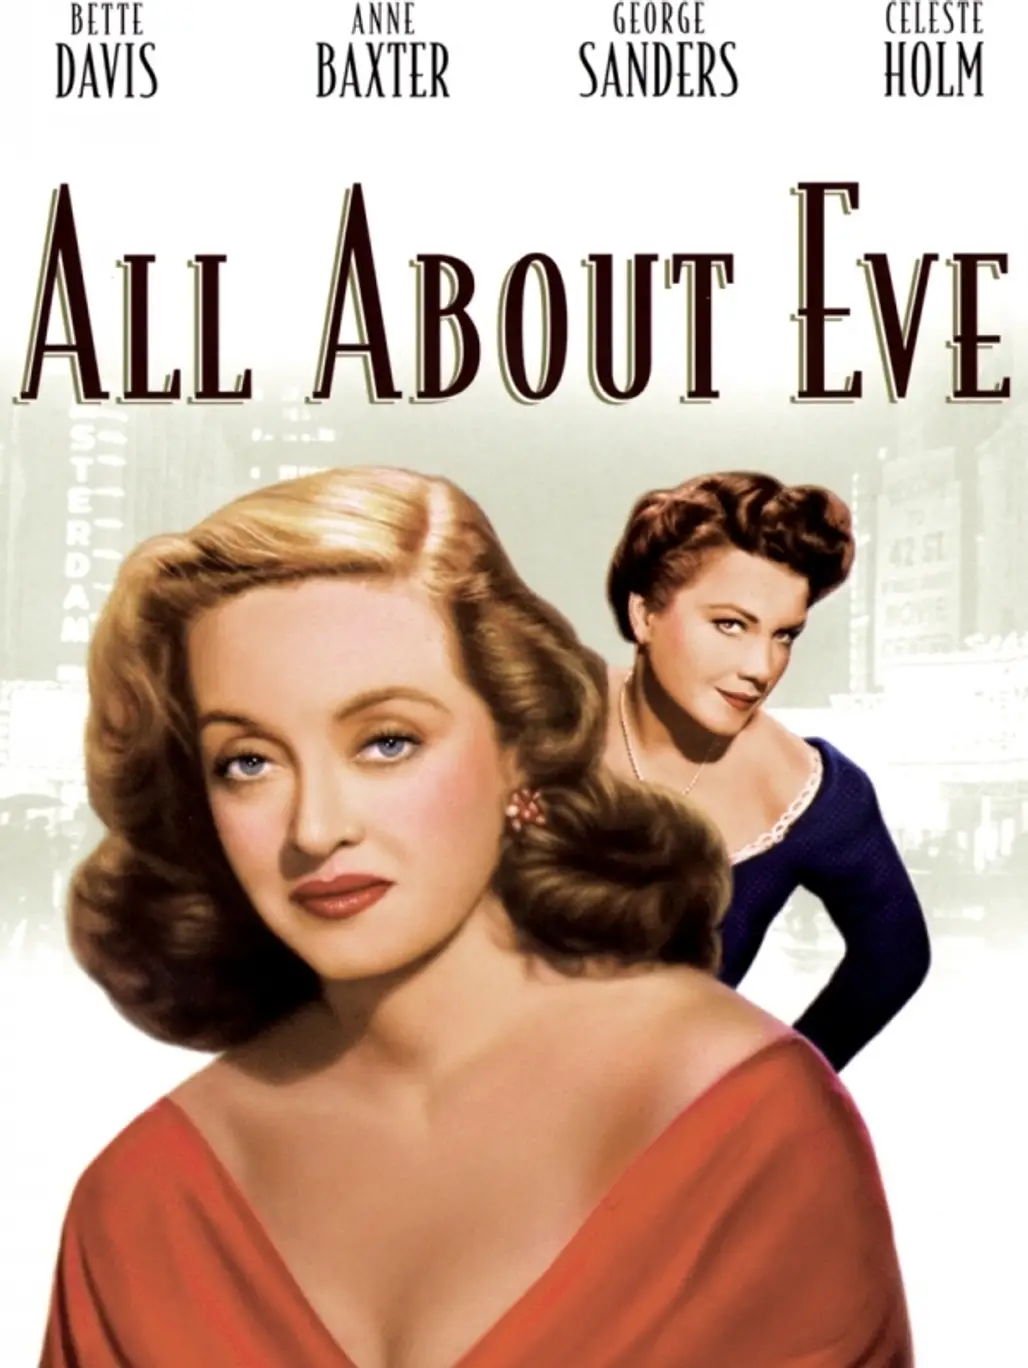 All about Eve, 1950